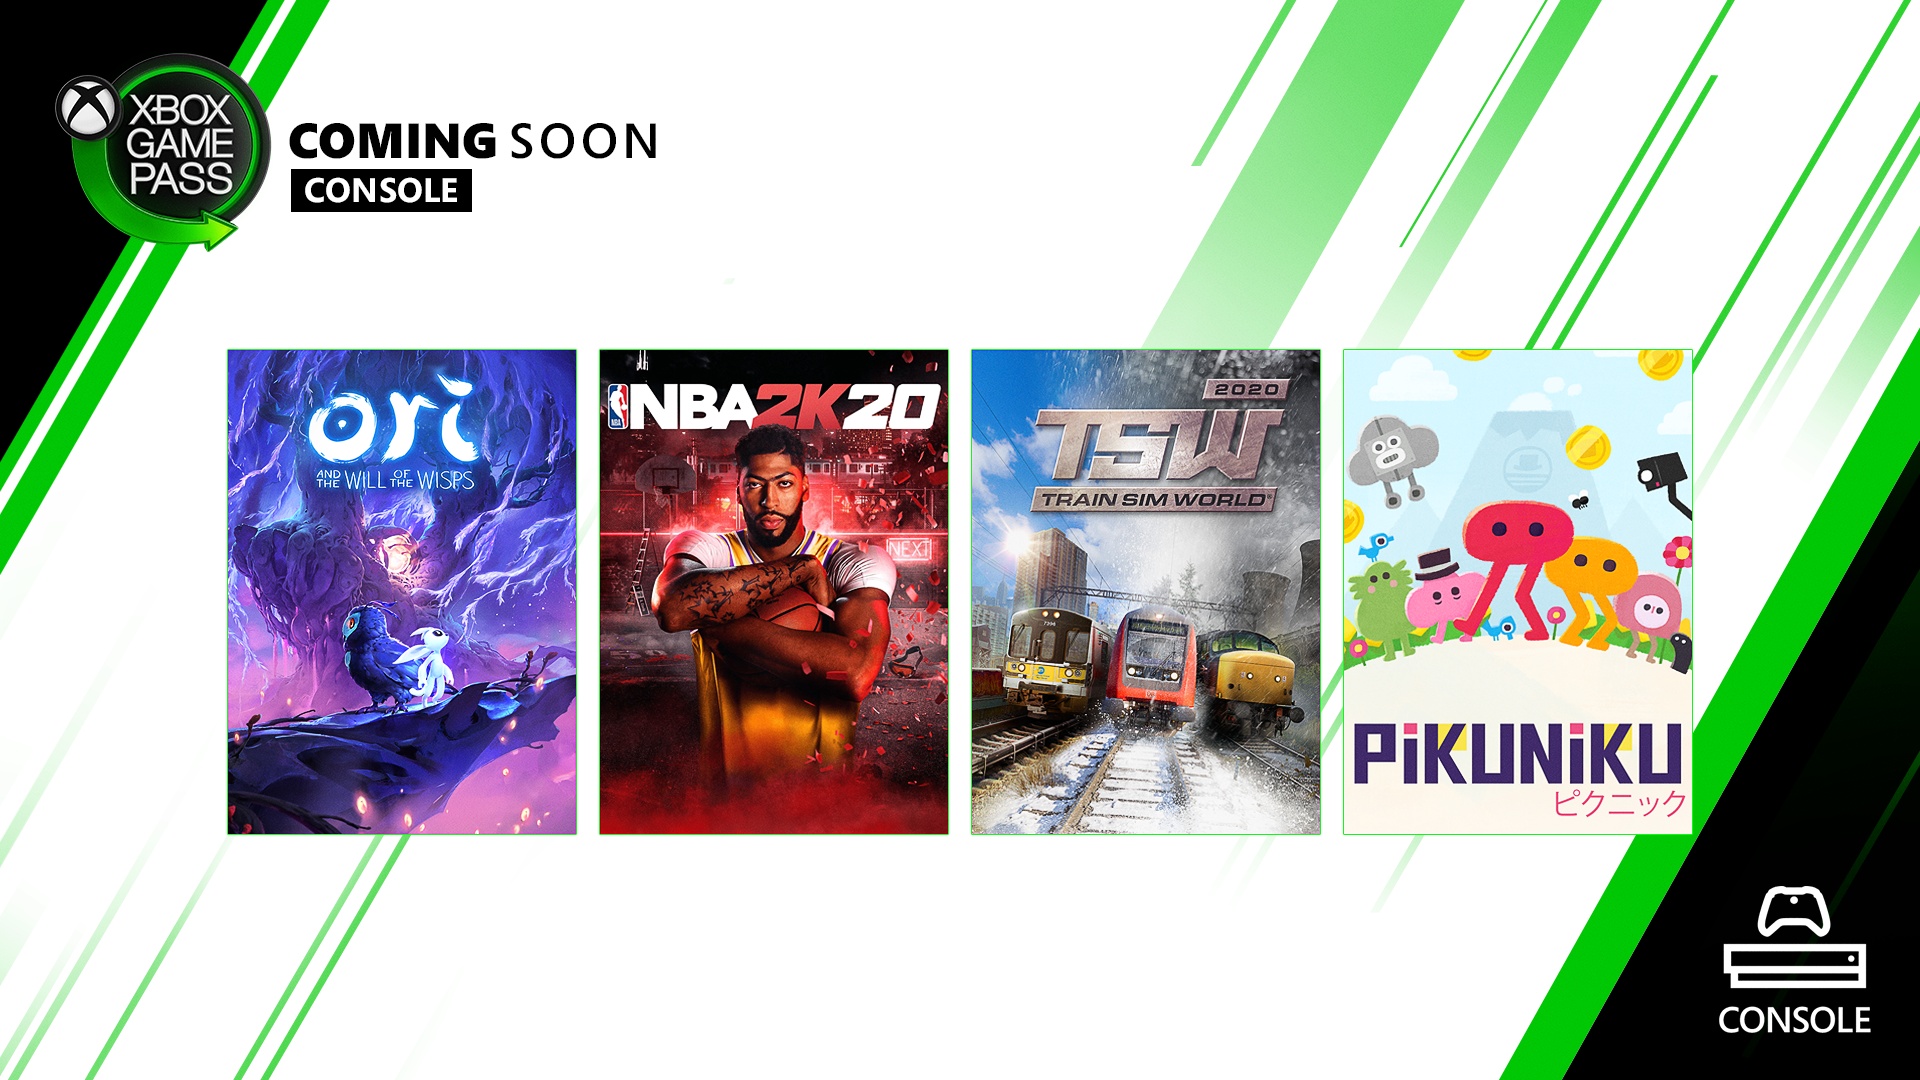 Coming Soon to Xbox Game Pass for Console